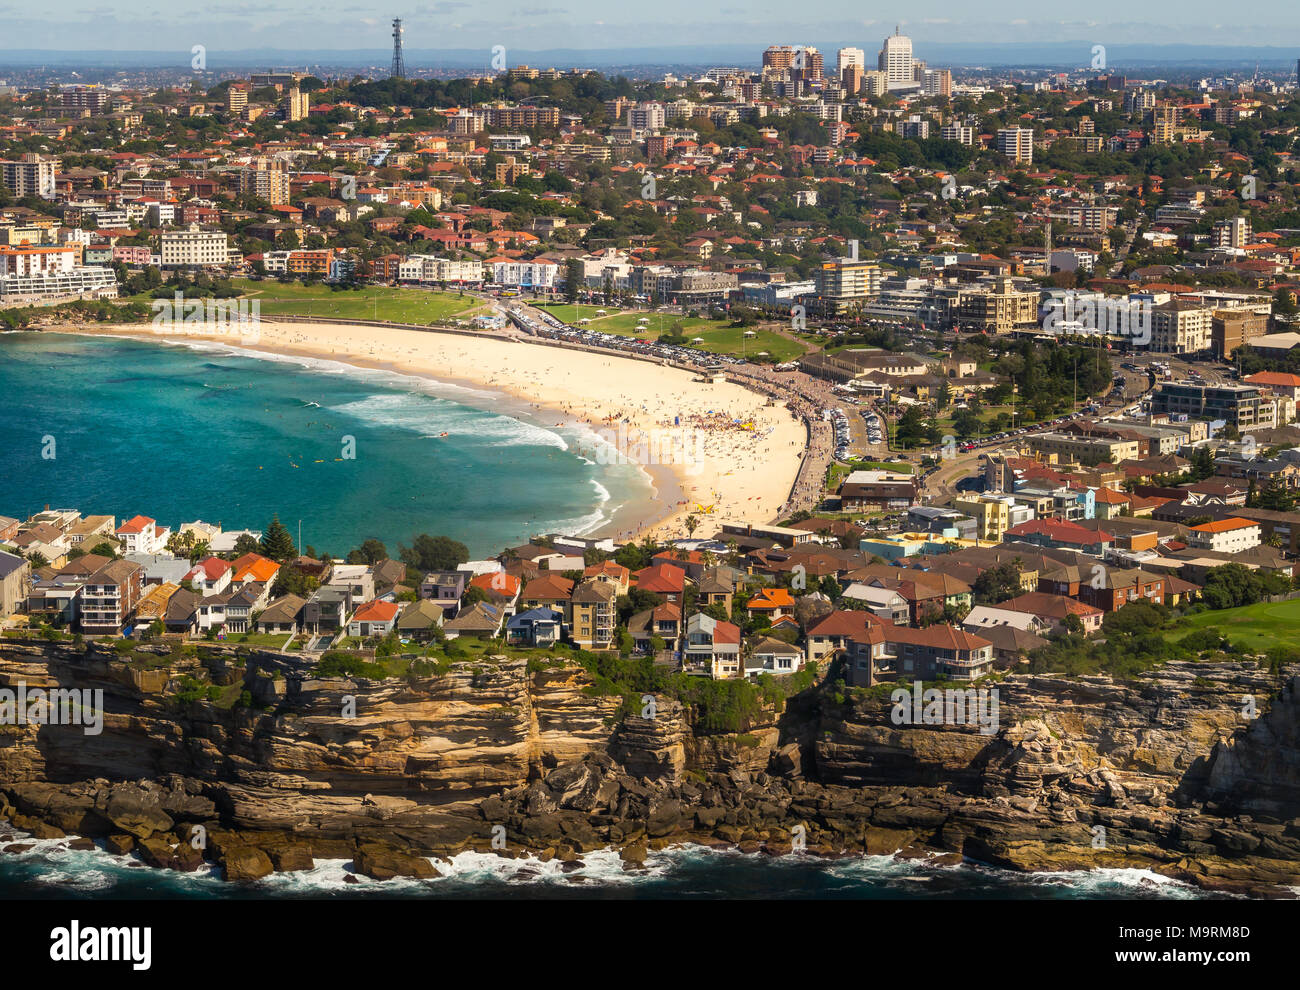 Aerial view from a small plane of Bondi beach, Sydney, Australia. A group of people can be seen gathered on the golden sand. Stock Photo